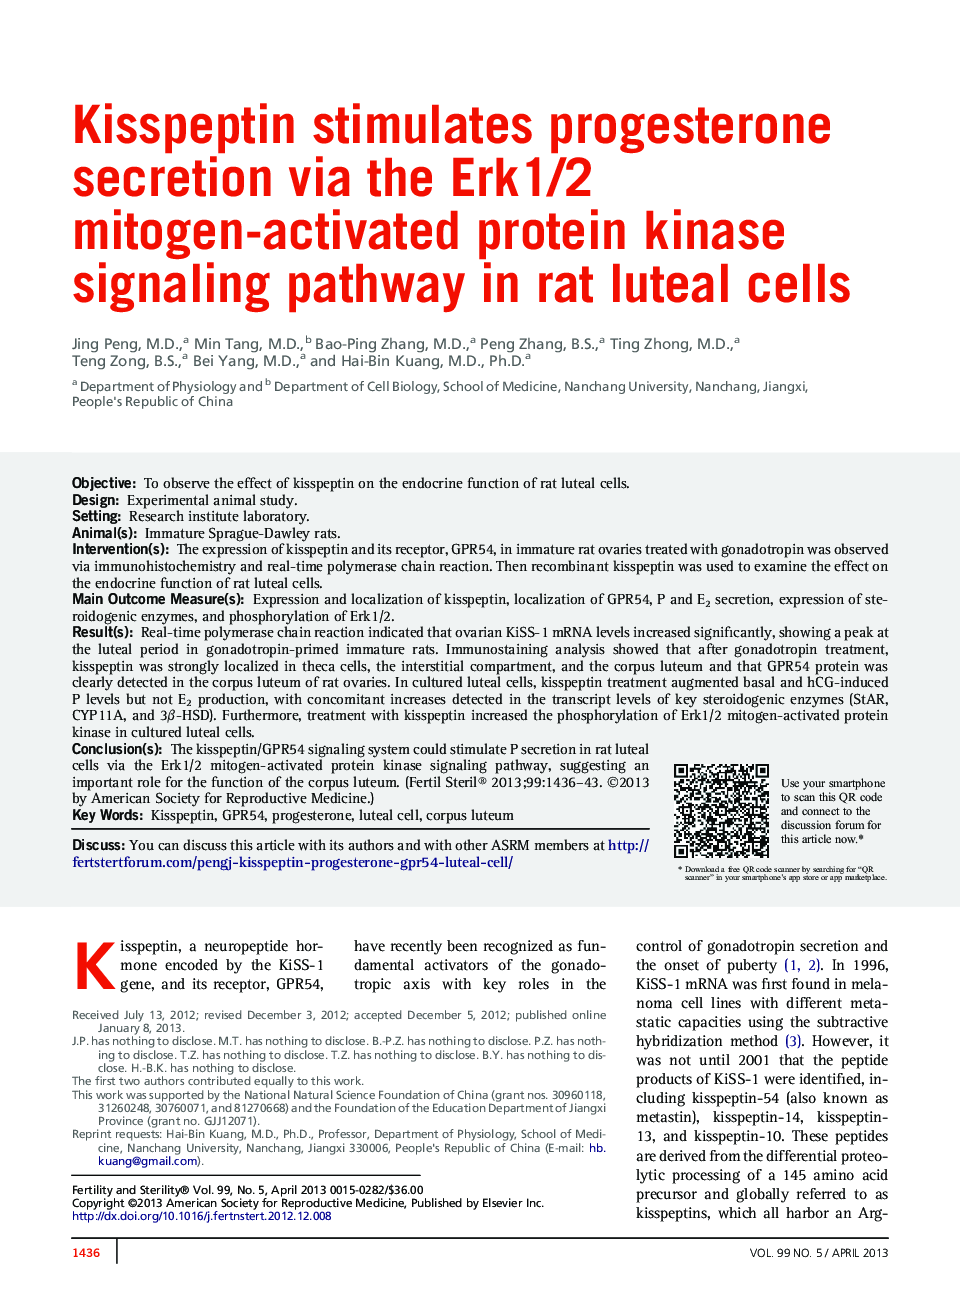 Kisspeptin stimulates progesterone secretion via the Erk1/2 mitogen-activated protein kinase signaling pathway in rat luteal cells